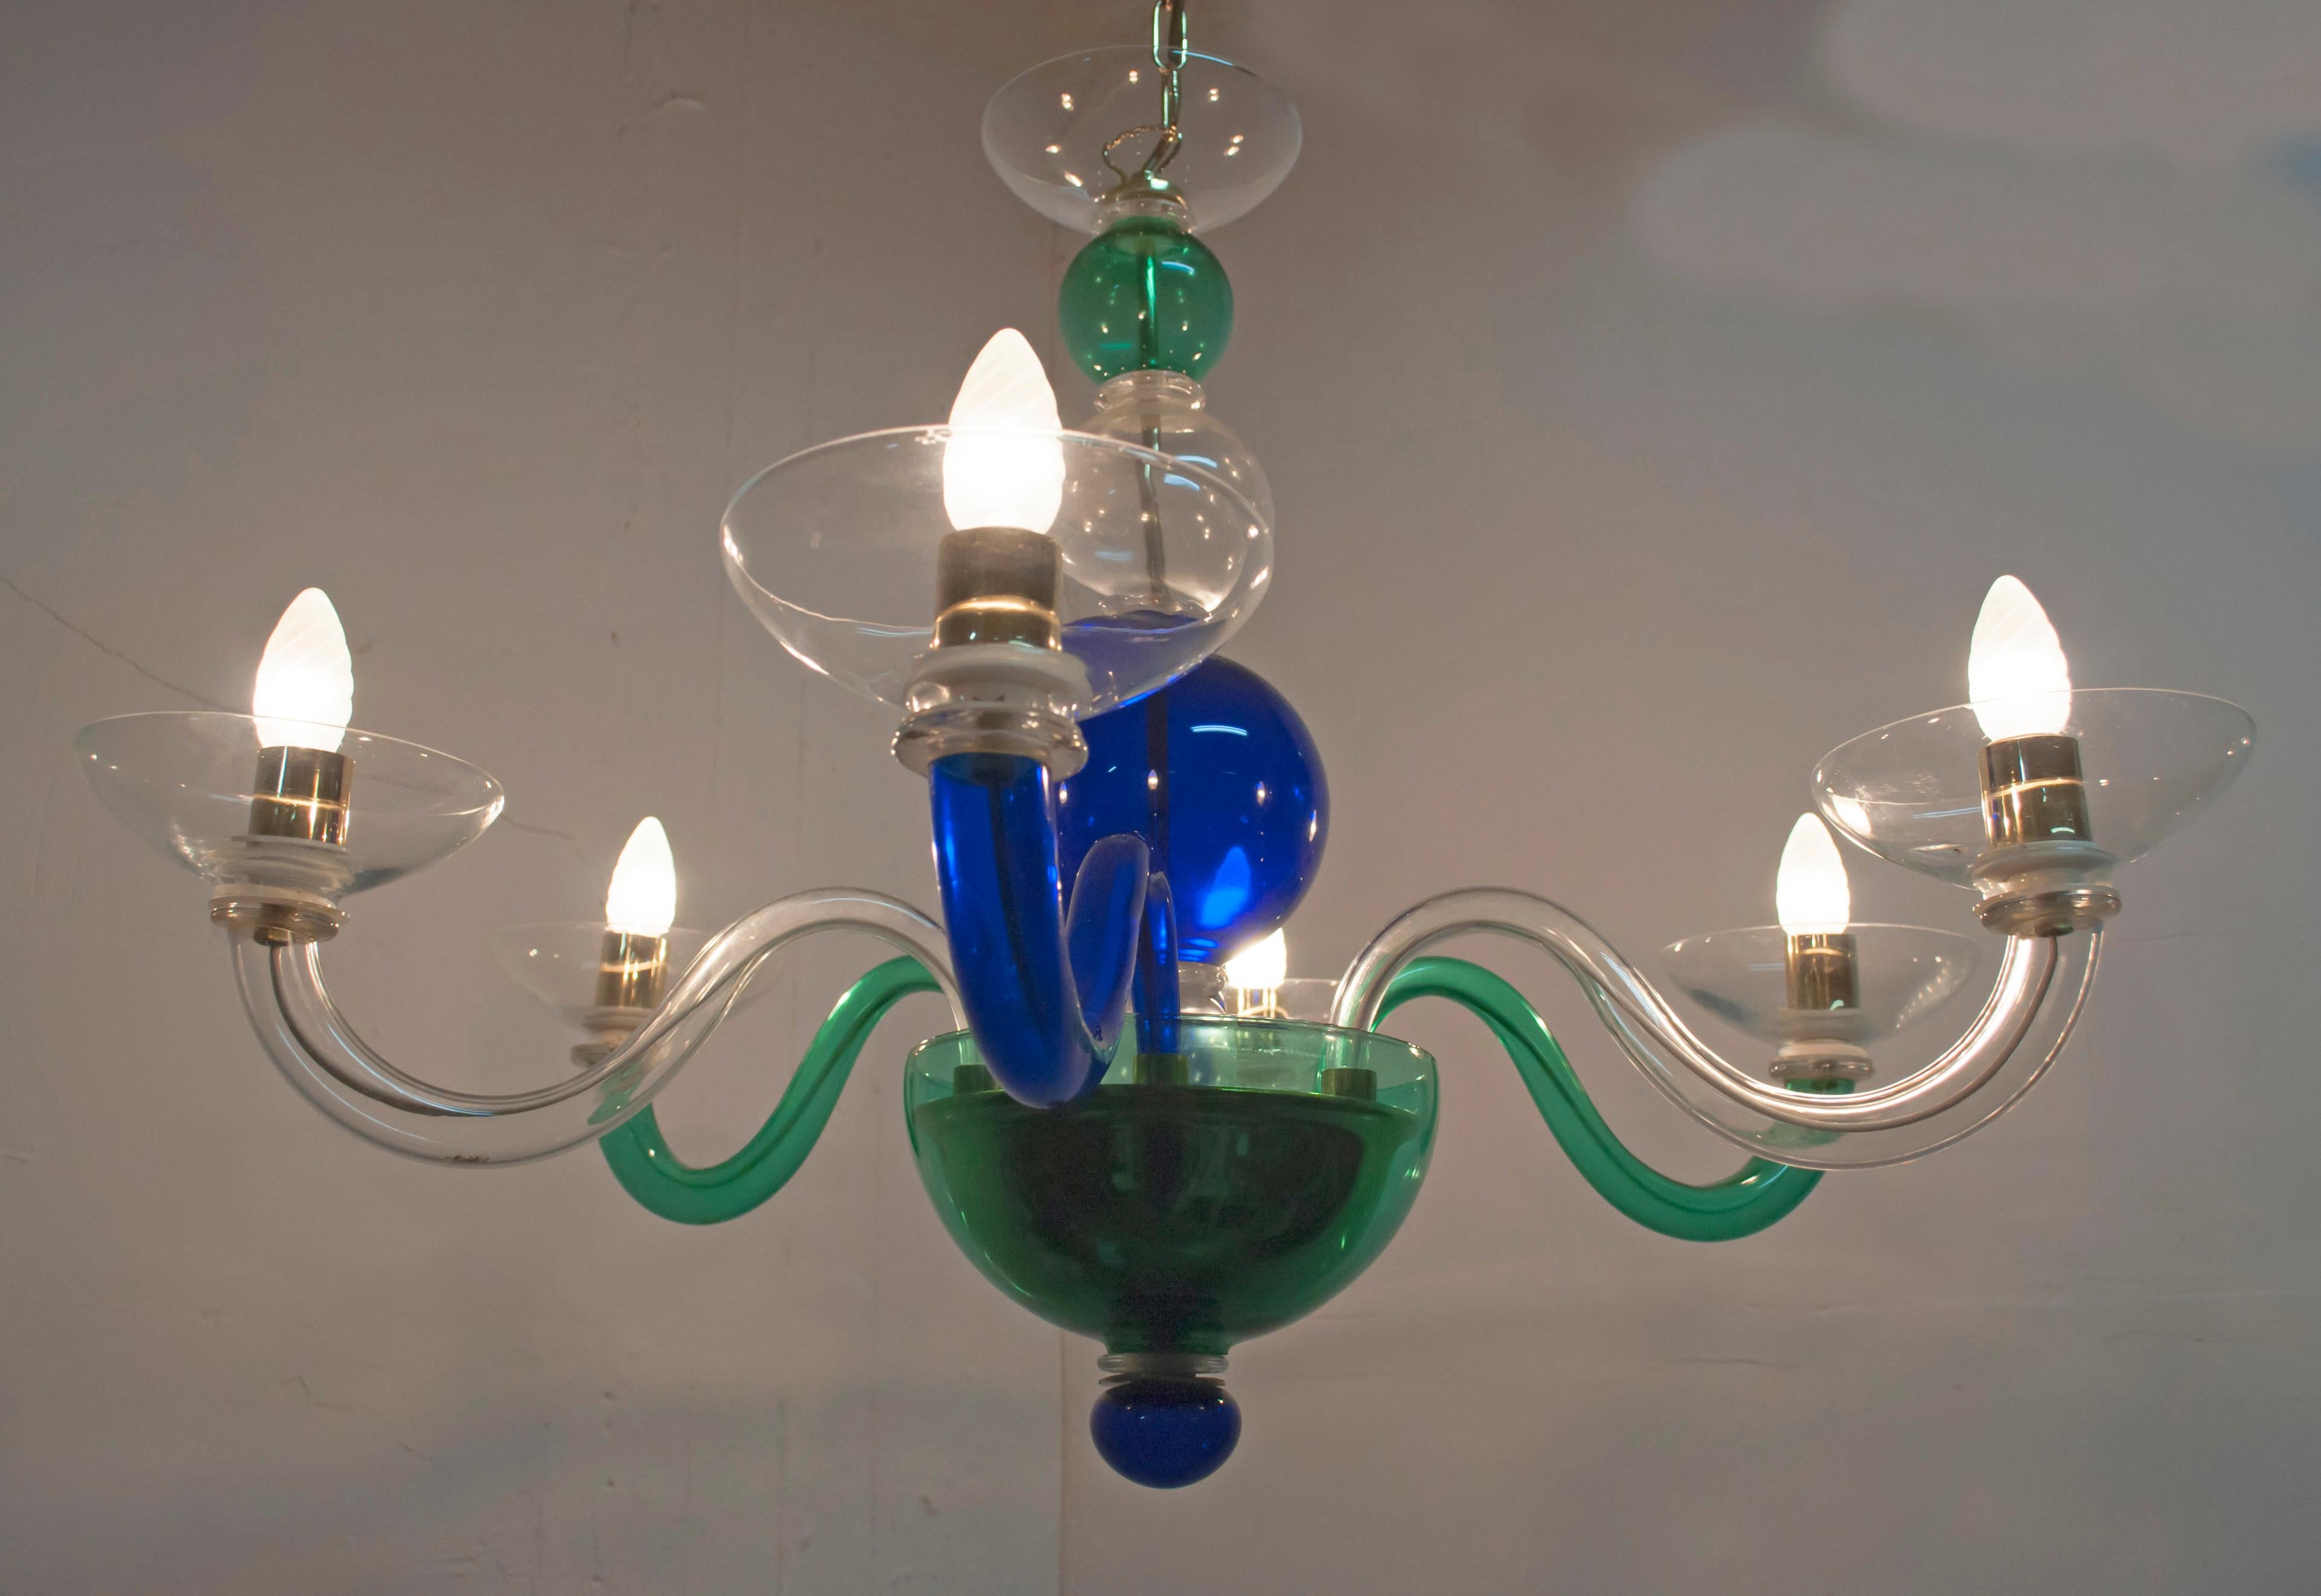 Multicolored Postmodern chandelier with six lights.
Produced by the historic Muranese company Sylcom in the 1990s
Handcrafted workmanship with mouth-blown glass.